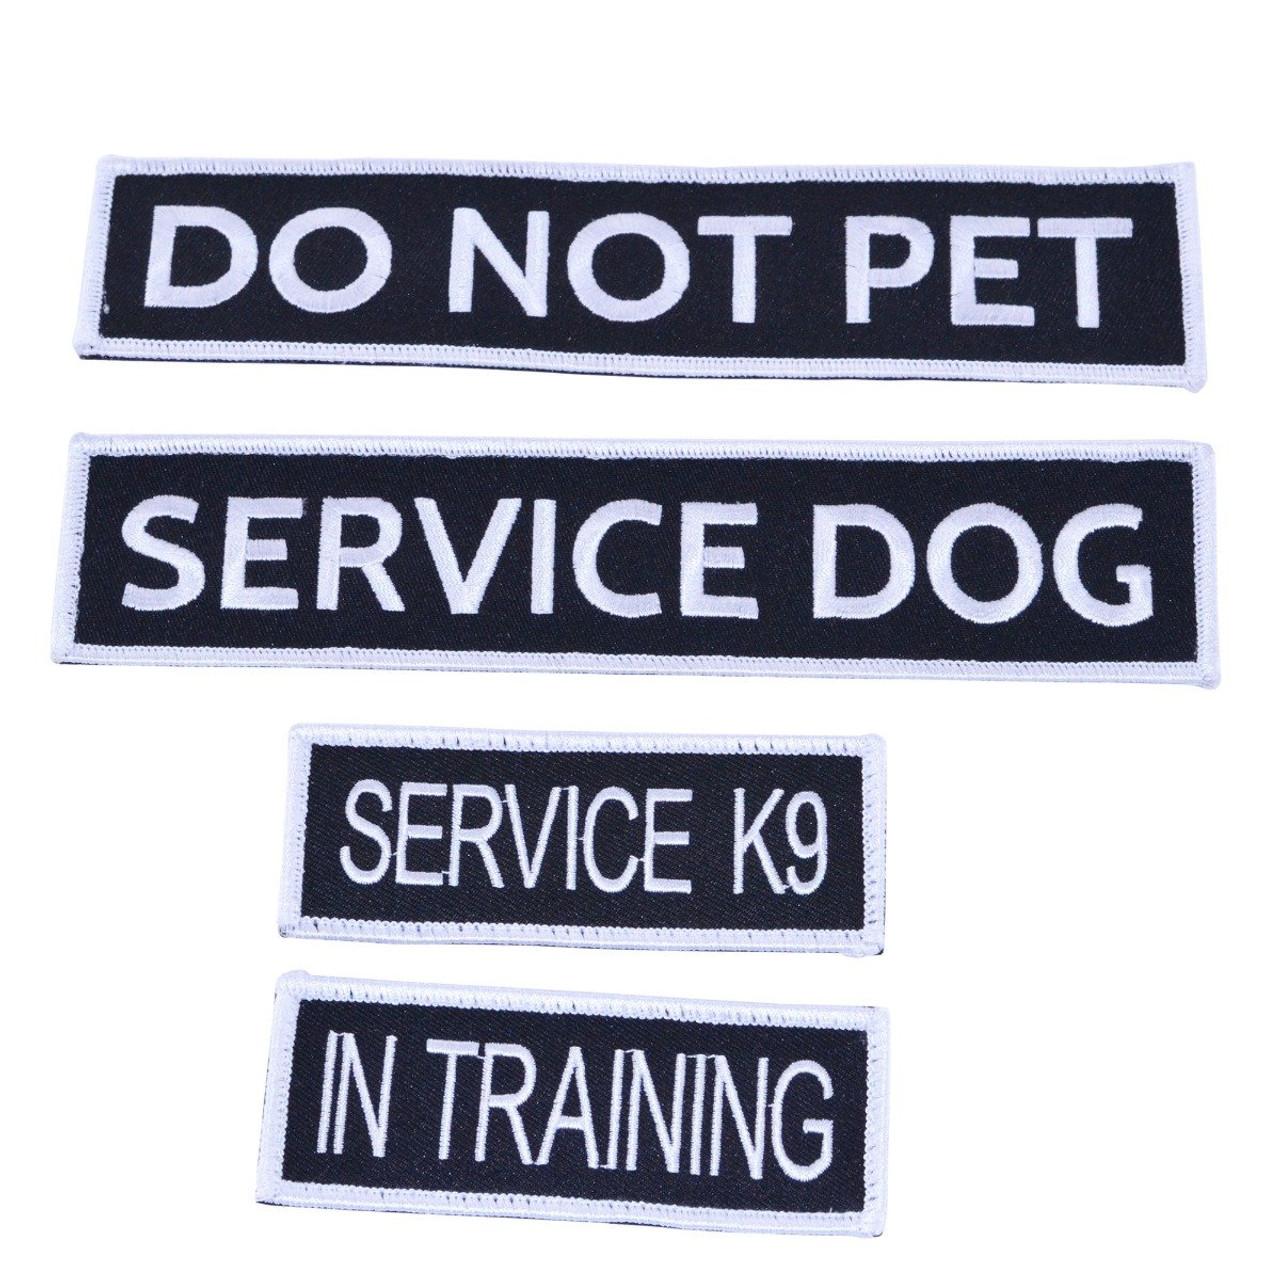 High-Quality Do Not Pet Patch